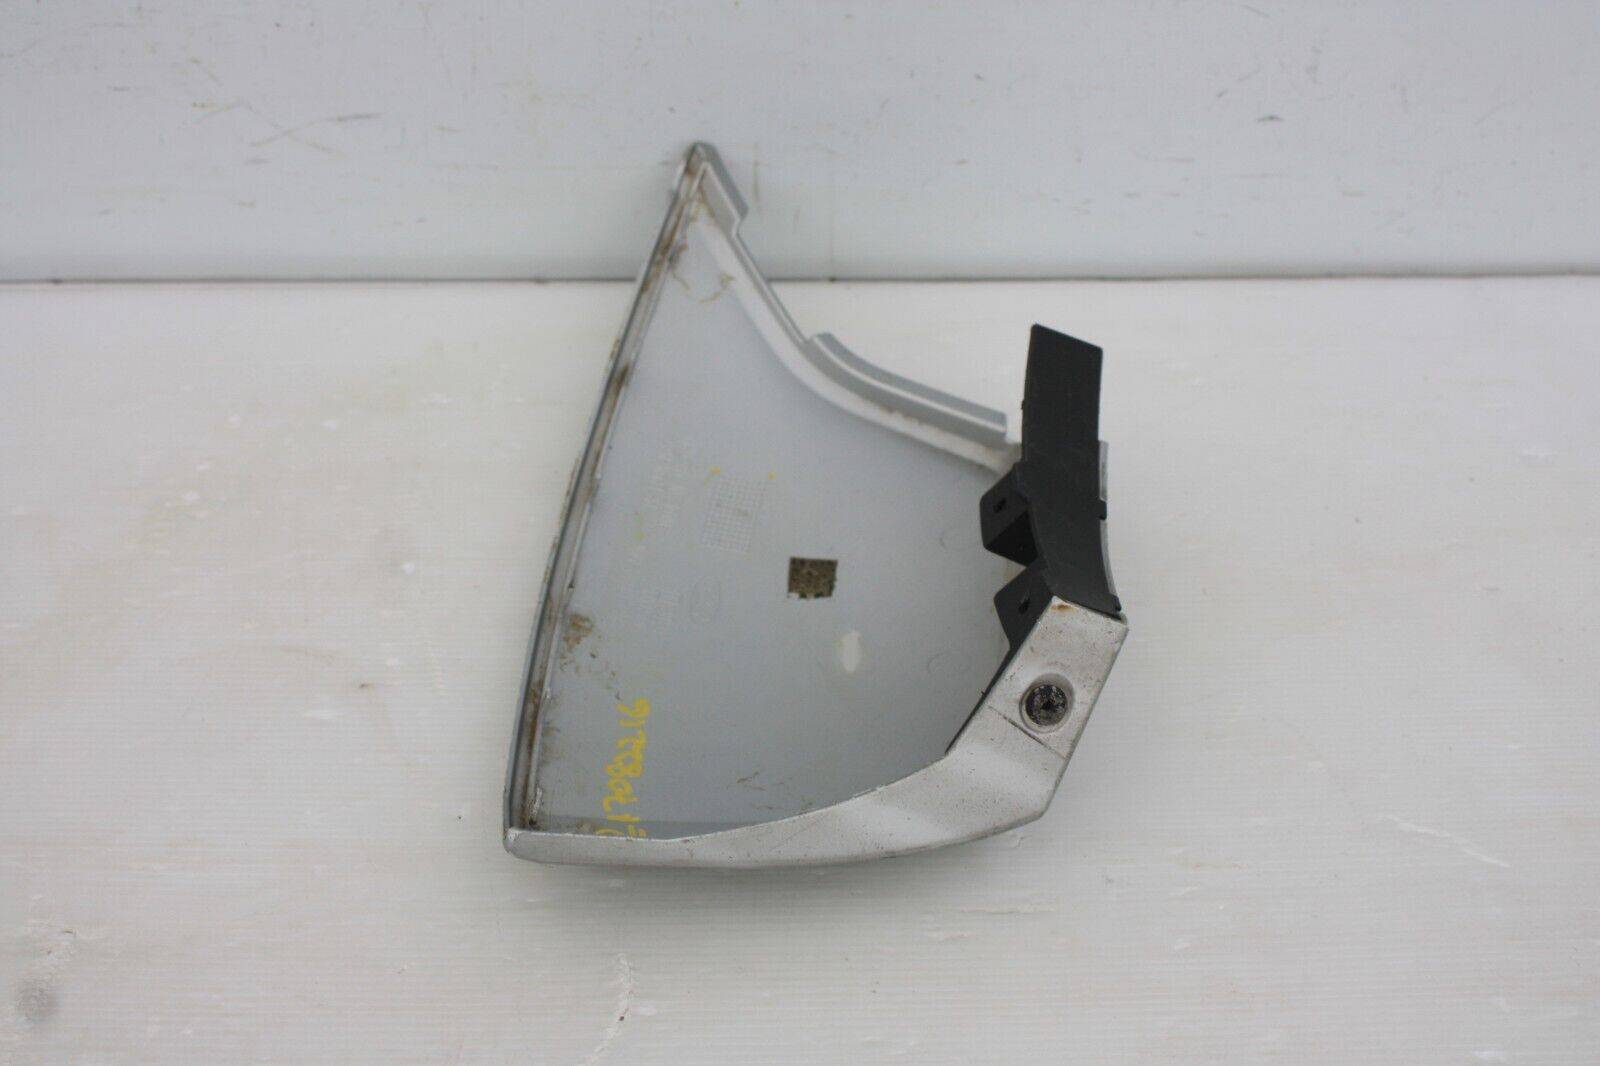 Ford-Fiesta-Rear-Bumper-Right-Side-Trim-Cover-2008-to-2012-8A6J-17B891-AAW-175883634834-4